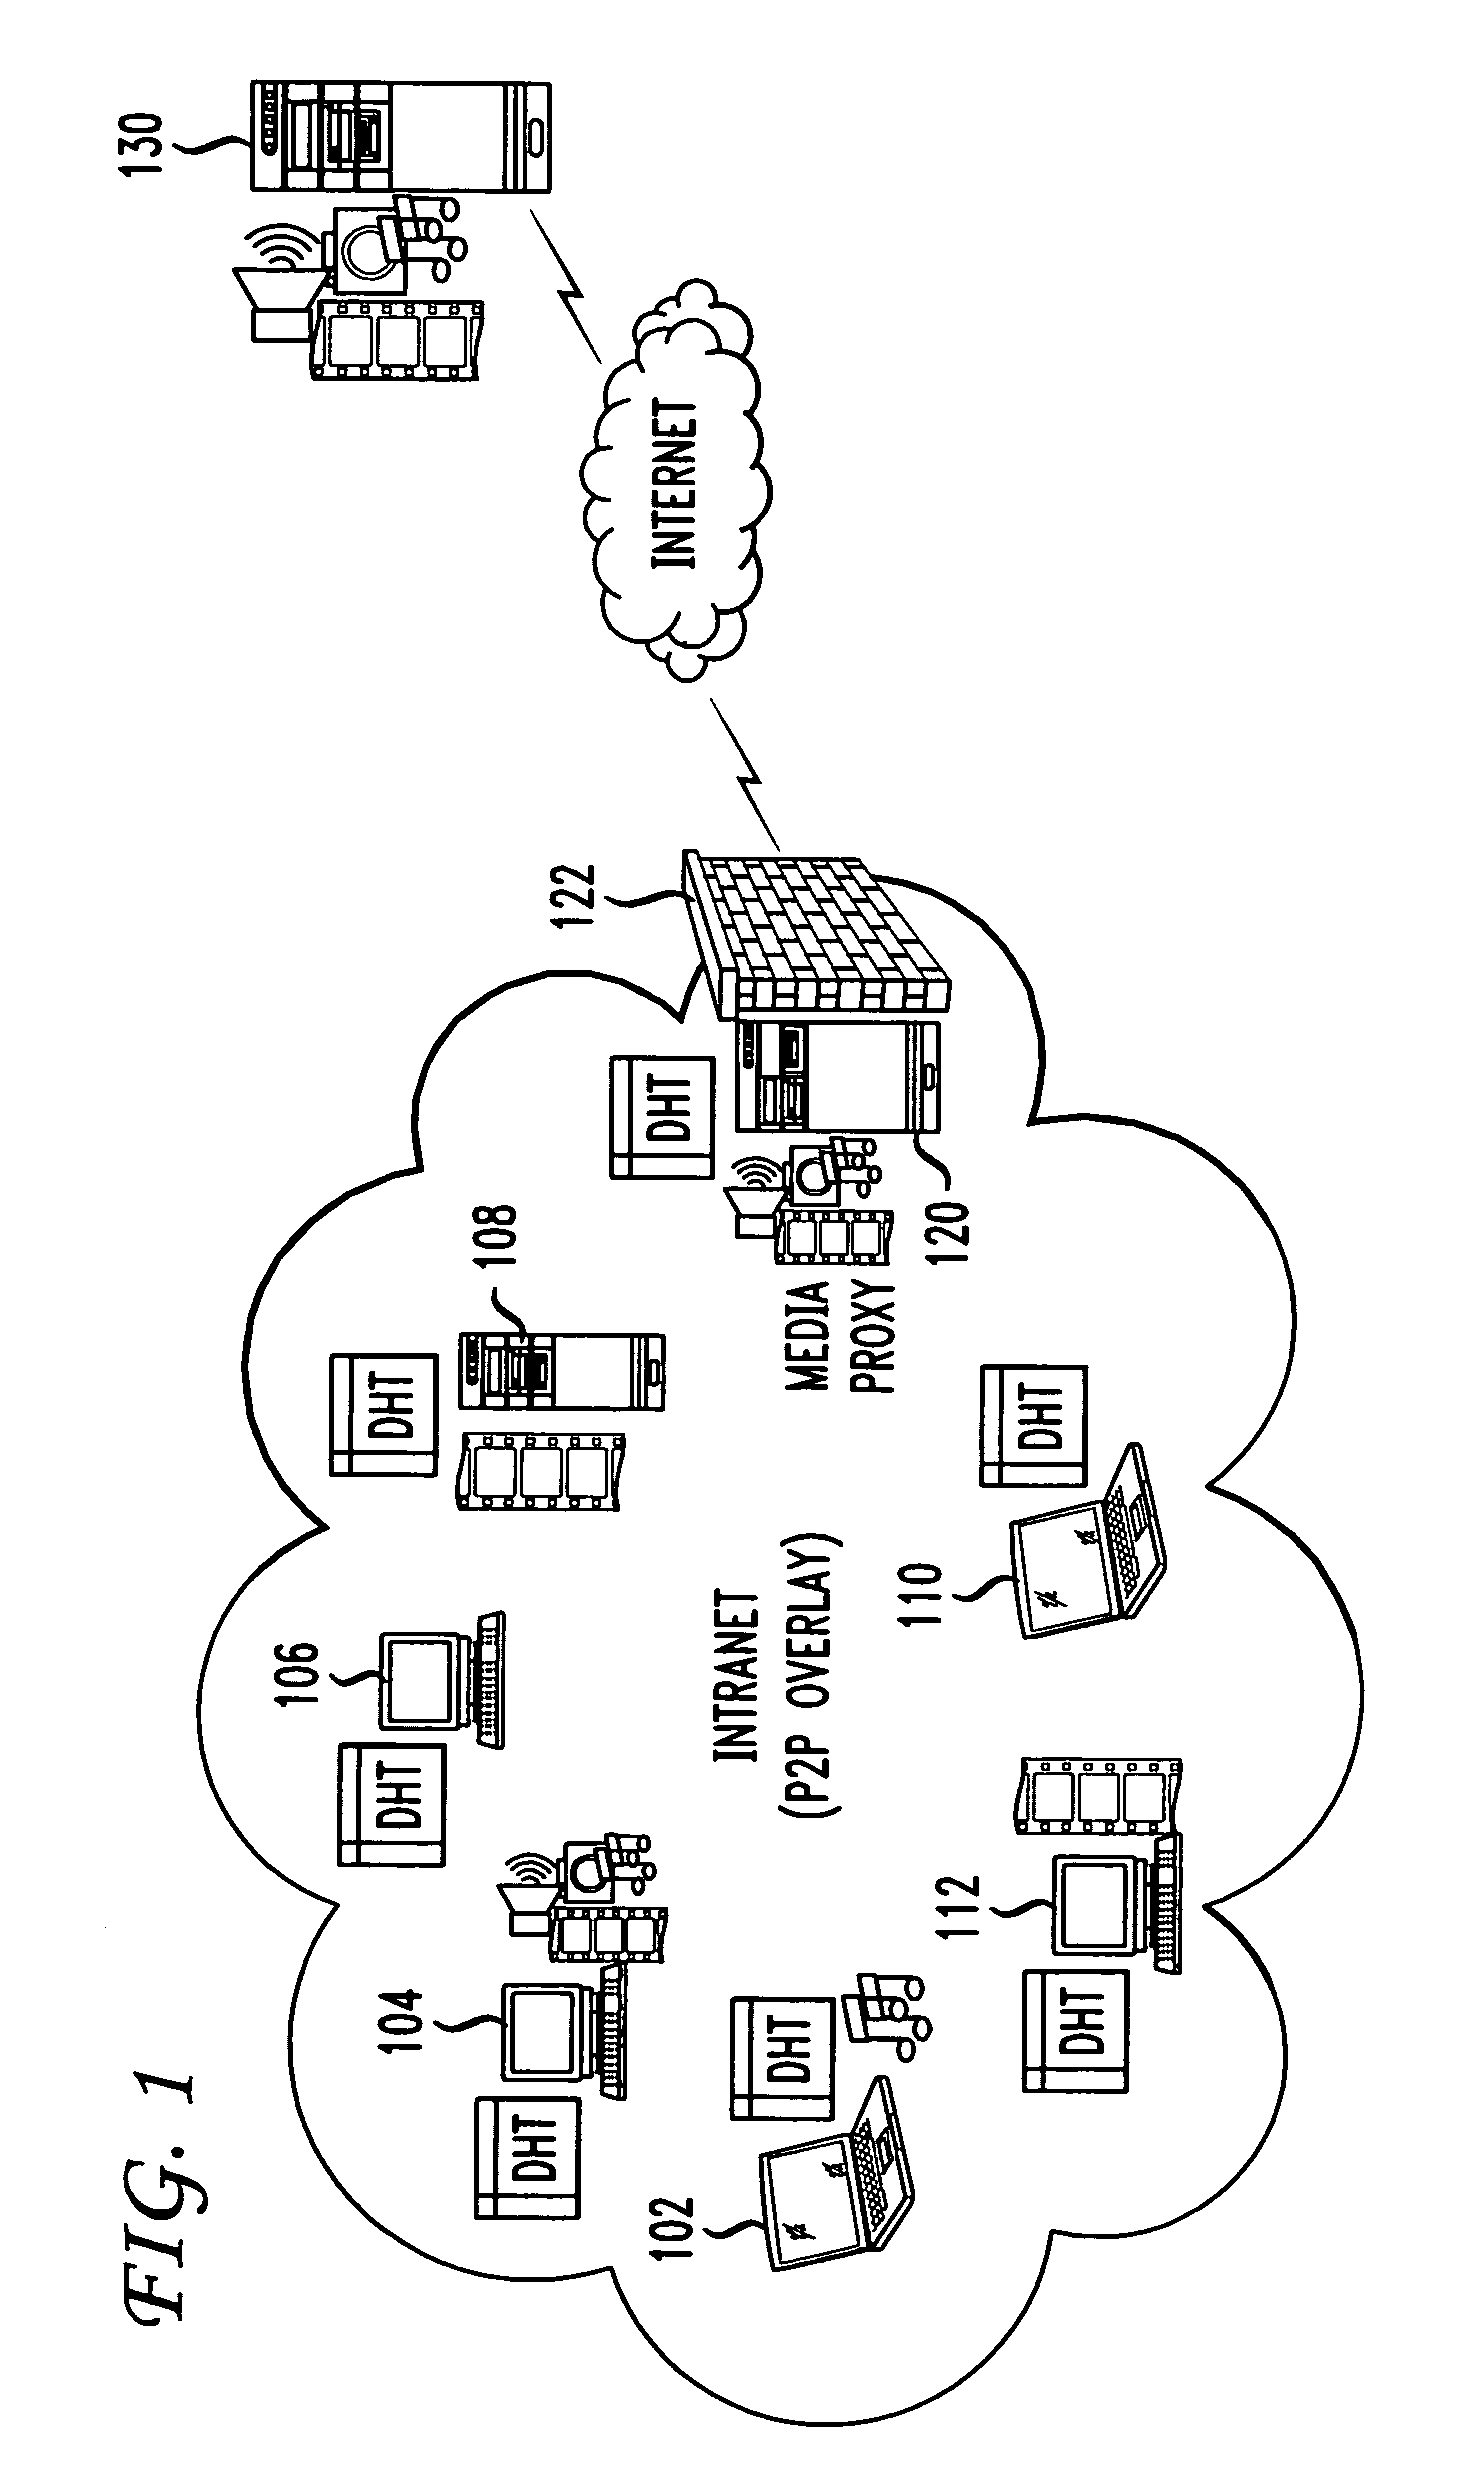 System and method for streaming media objects